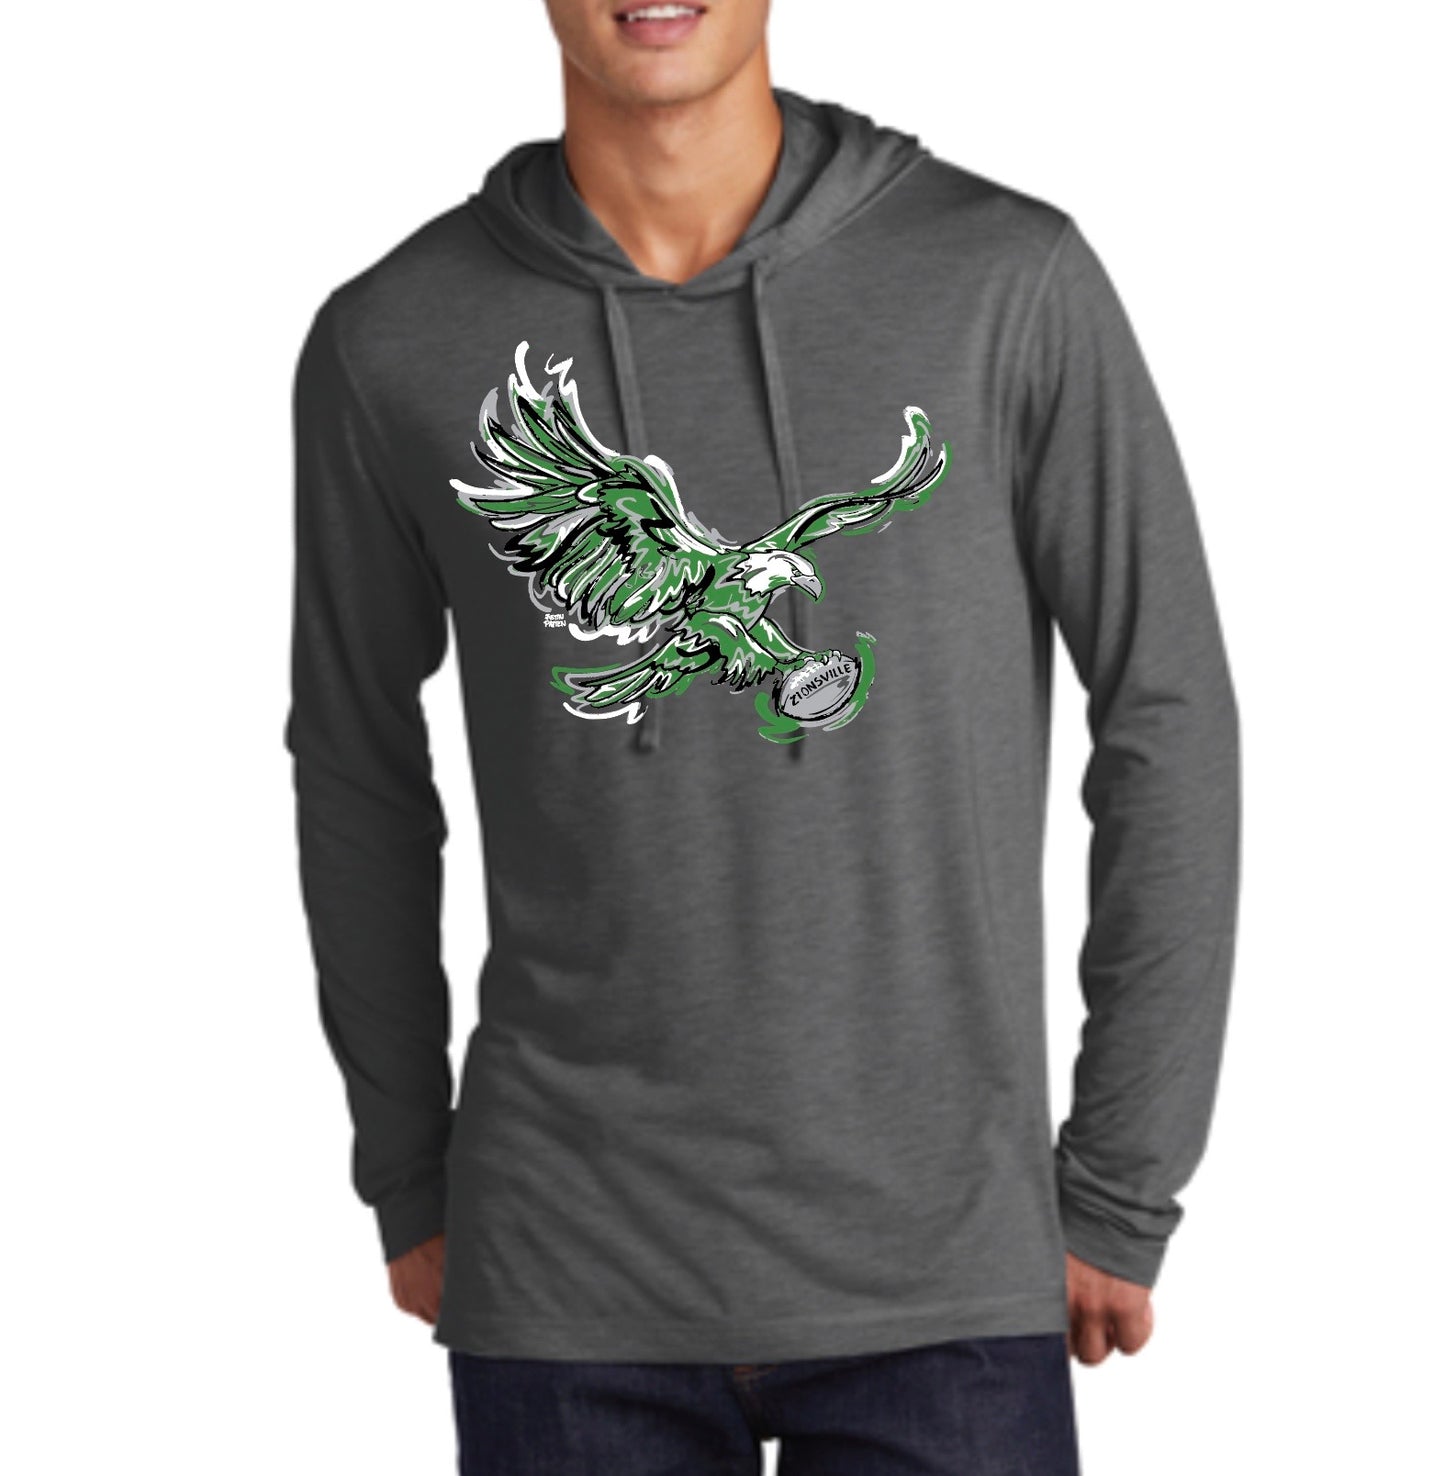 Zionsville Eagle Football Unisex Hooded Tee by Justin Patten (1 Color)